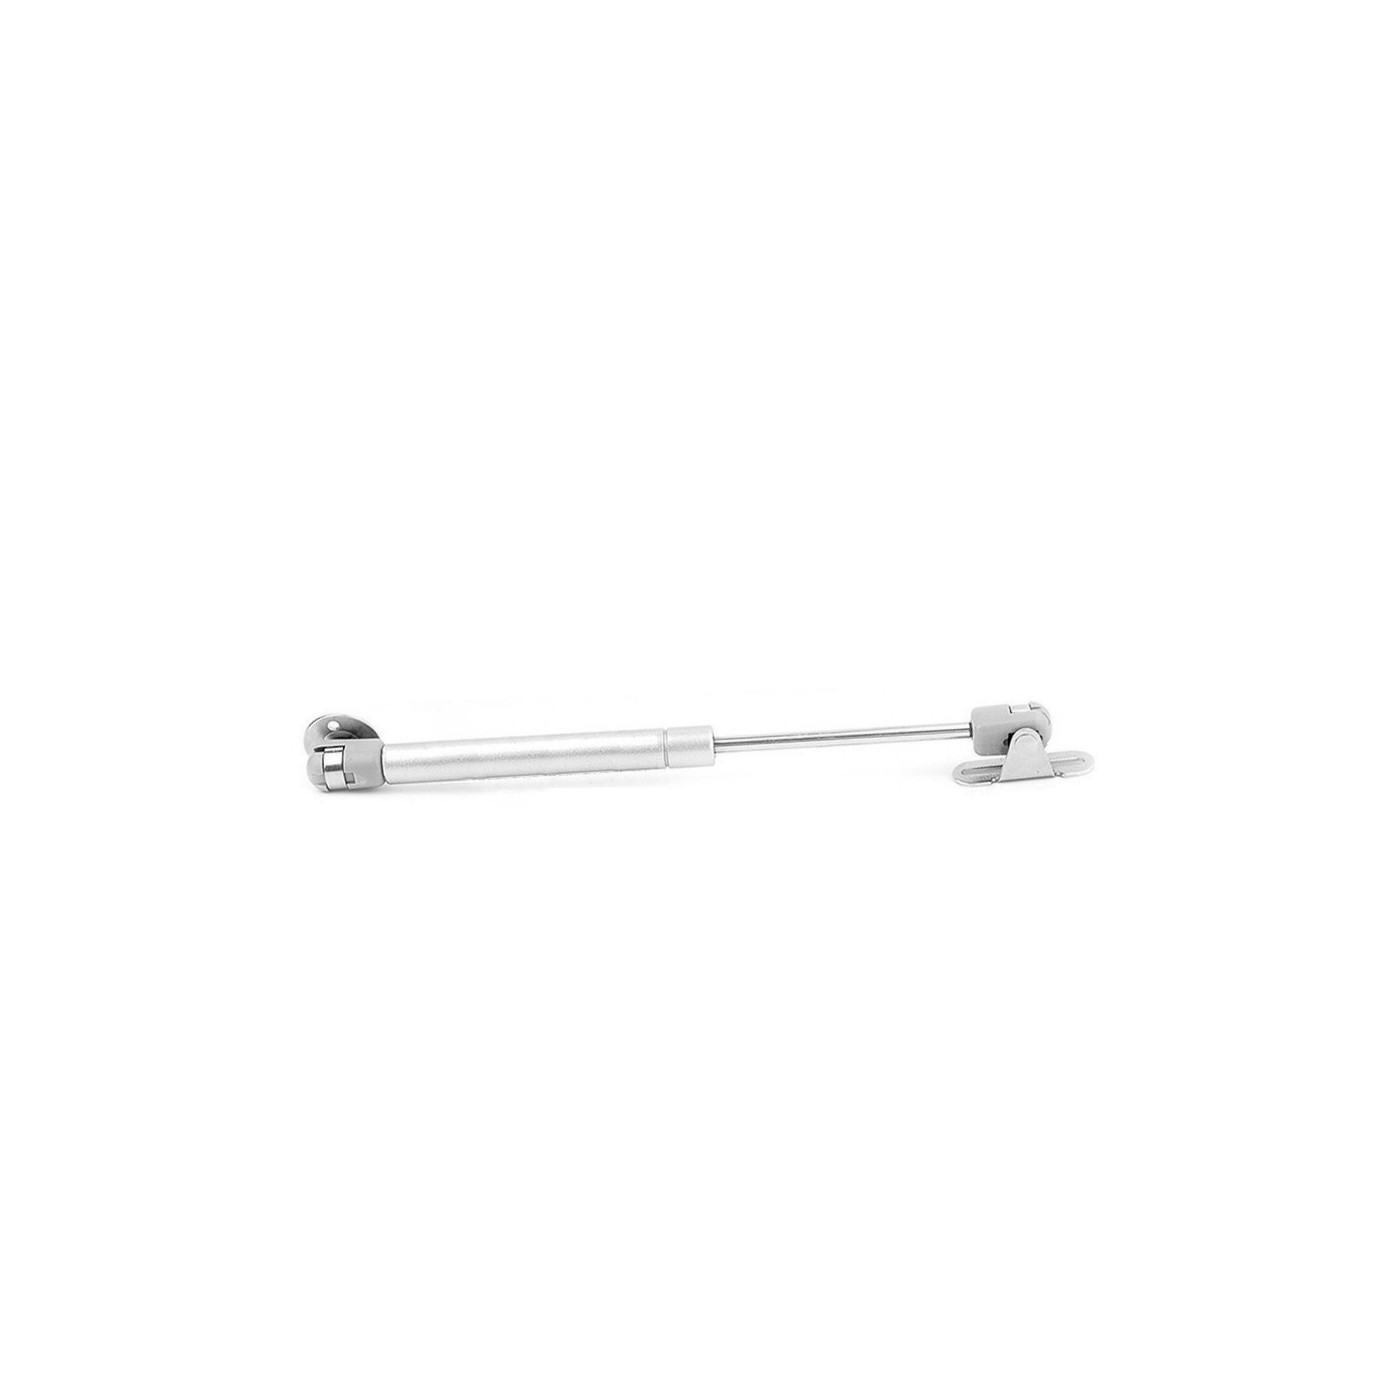 Universal gas spring with brackets (50N/5kg, 244 mm, silver)